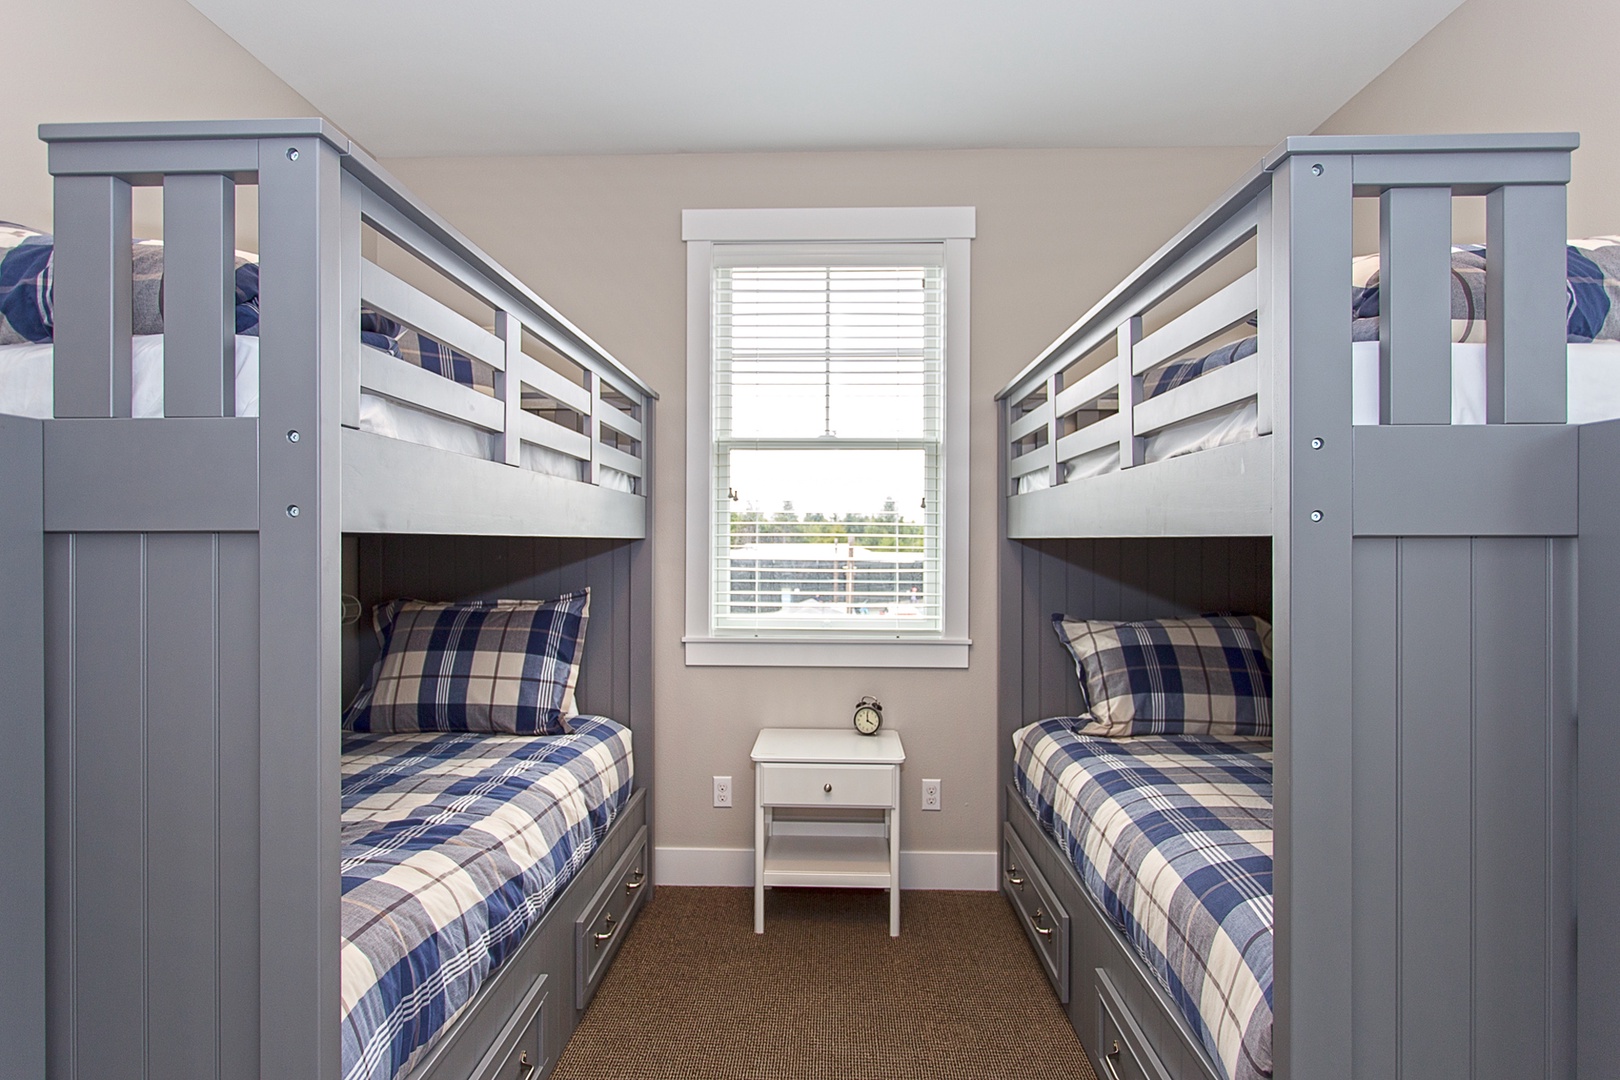 Second floor, two twin bunks in the bunk room